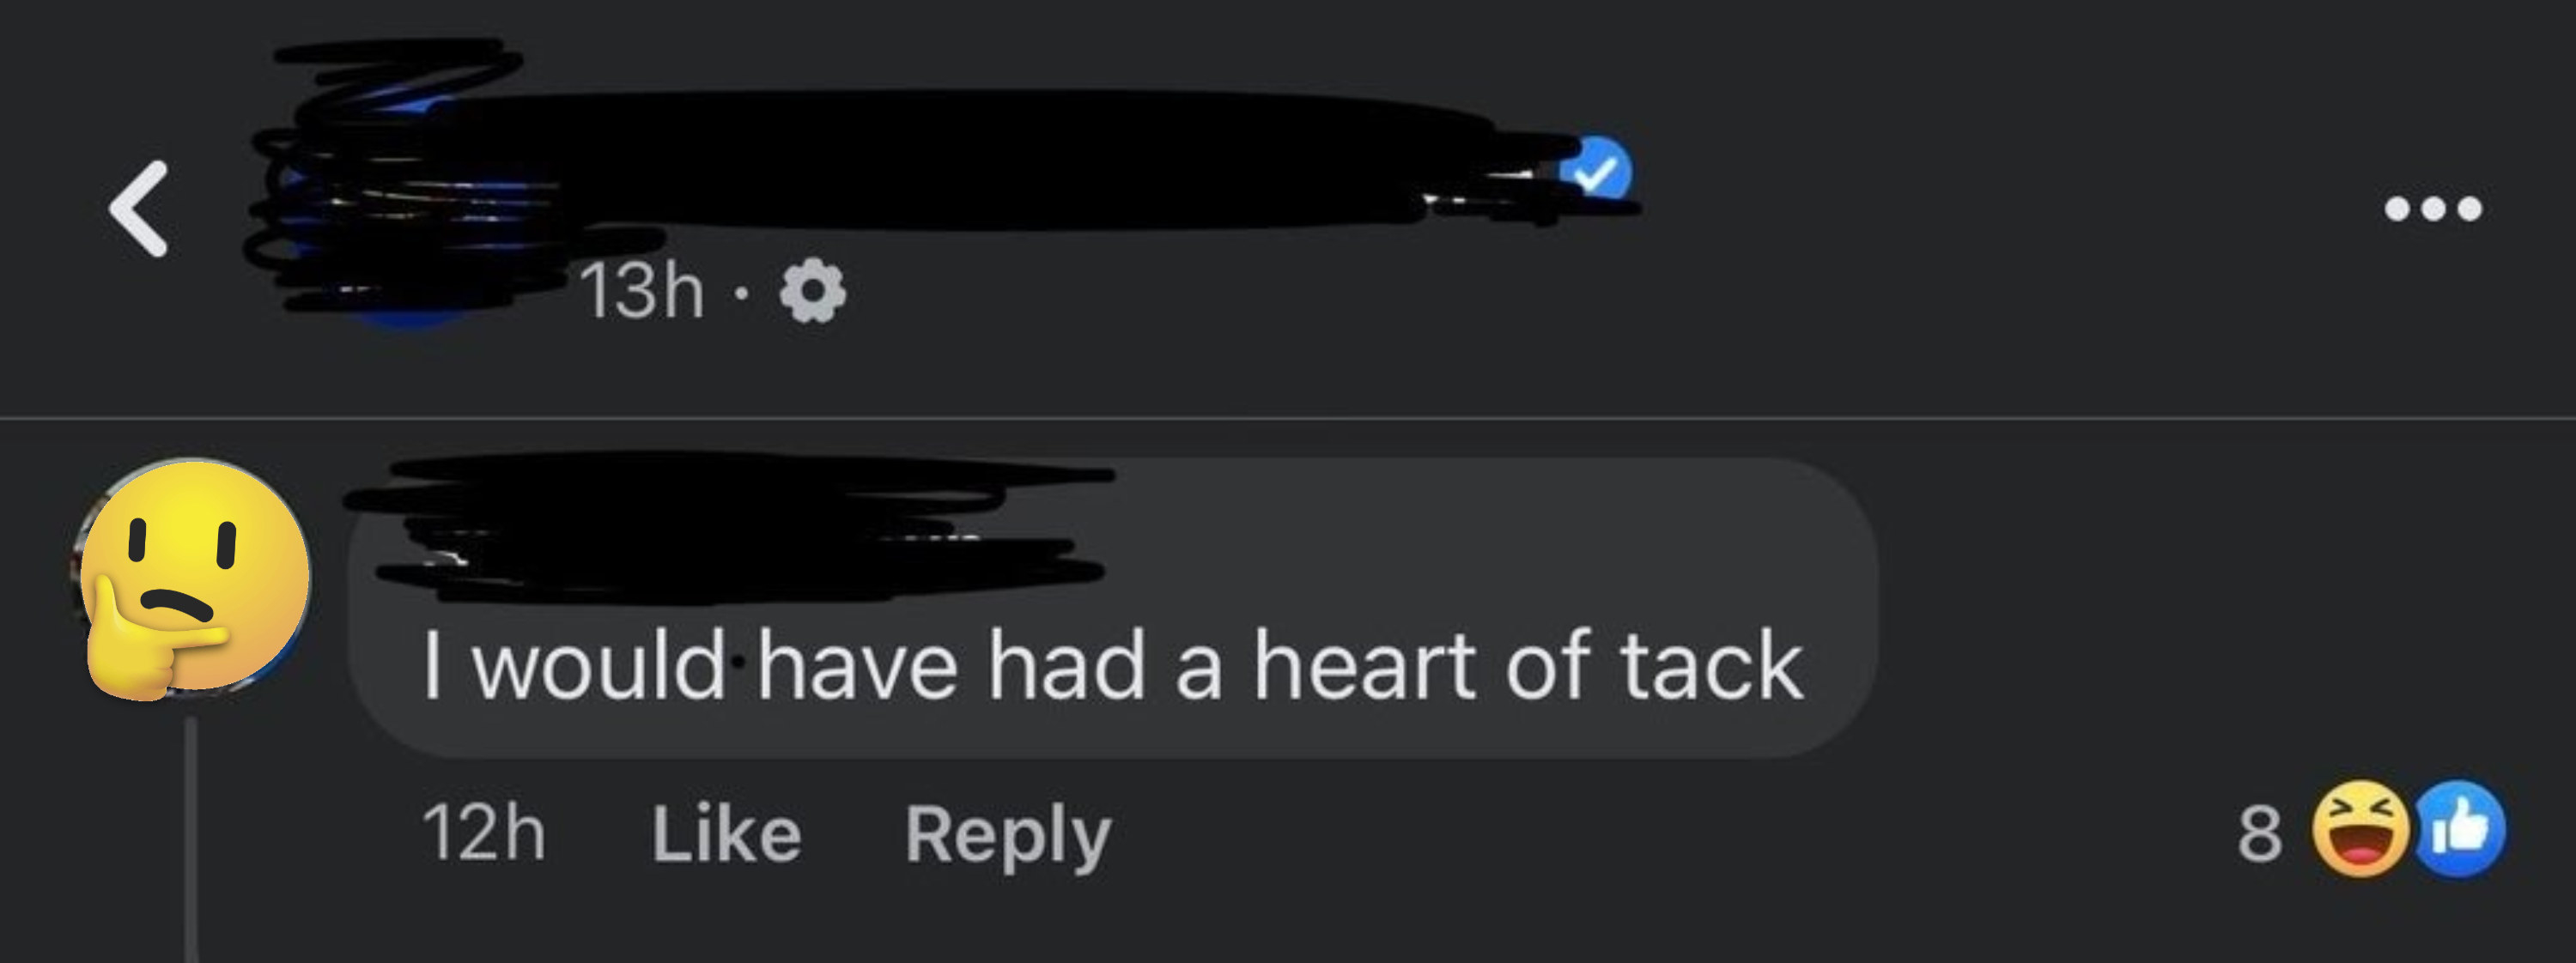 person saying heart of tack instead of heart attack